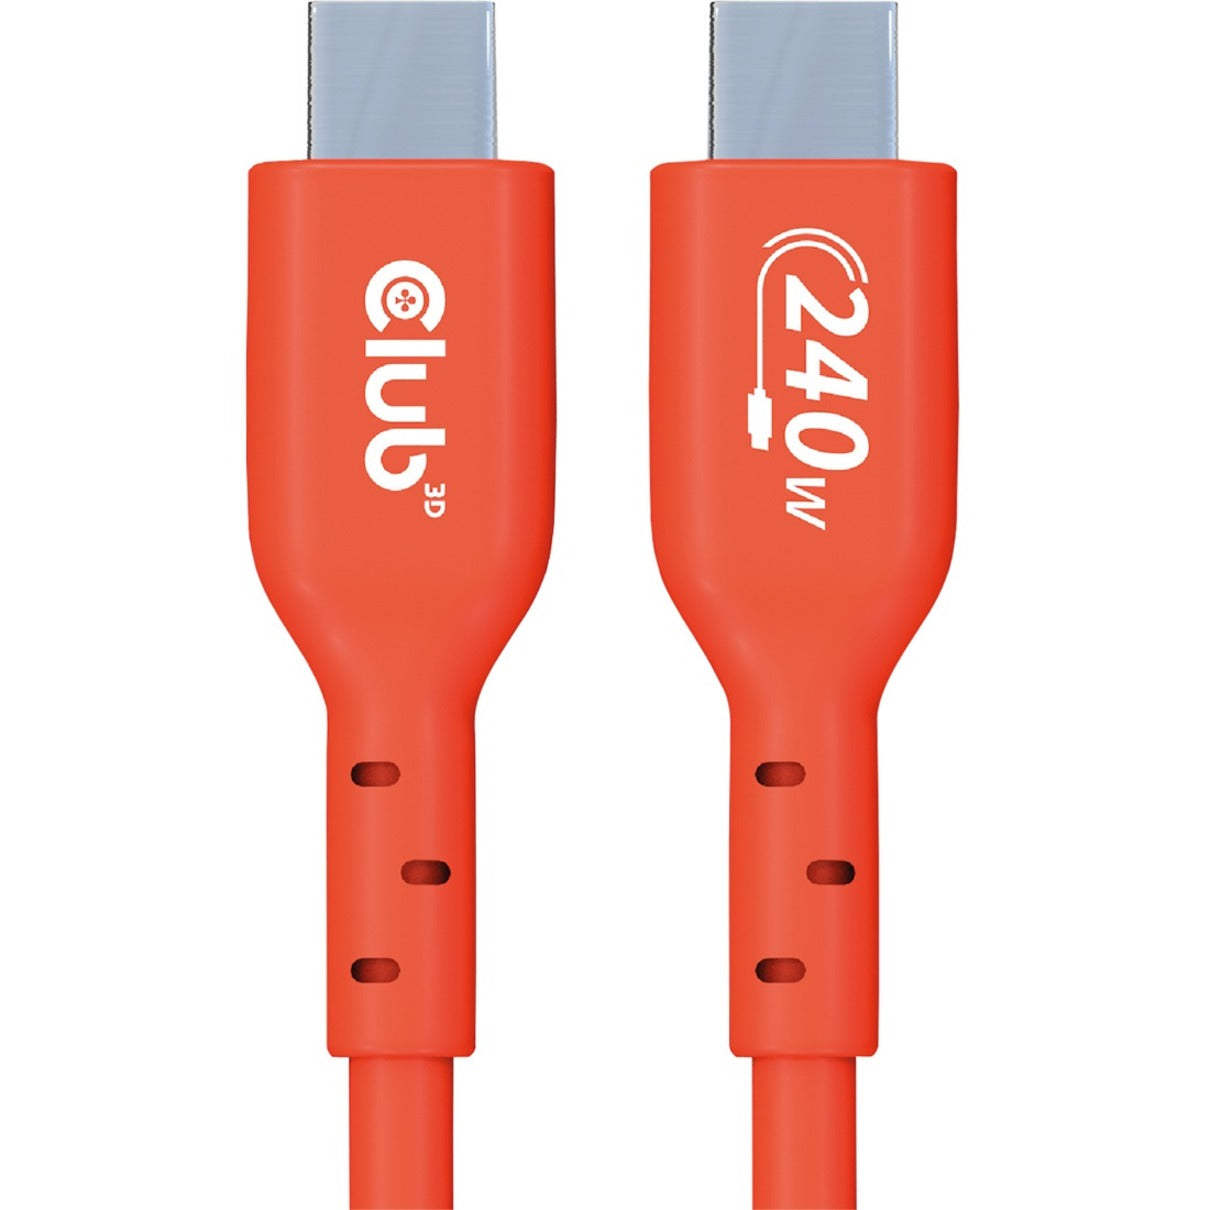 Club 3D CAC-1573 USB-C Data Transfer Cable, 6.56 ft, E-marker Chip, USB Power Delivery (USB PD), EMI Protection, Reversible